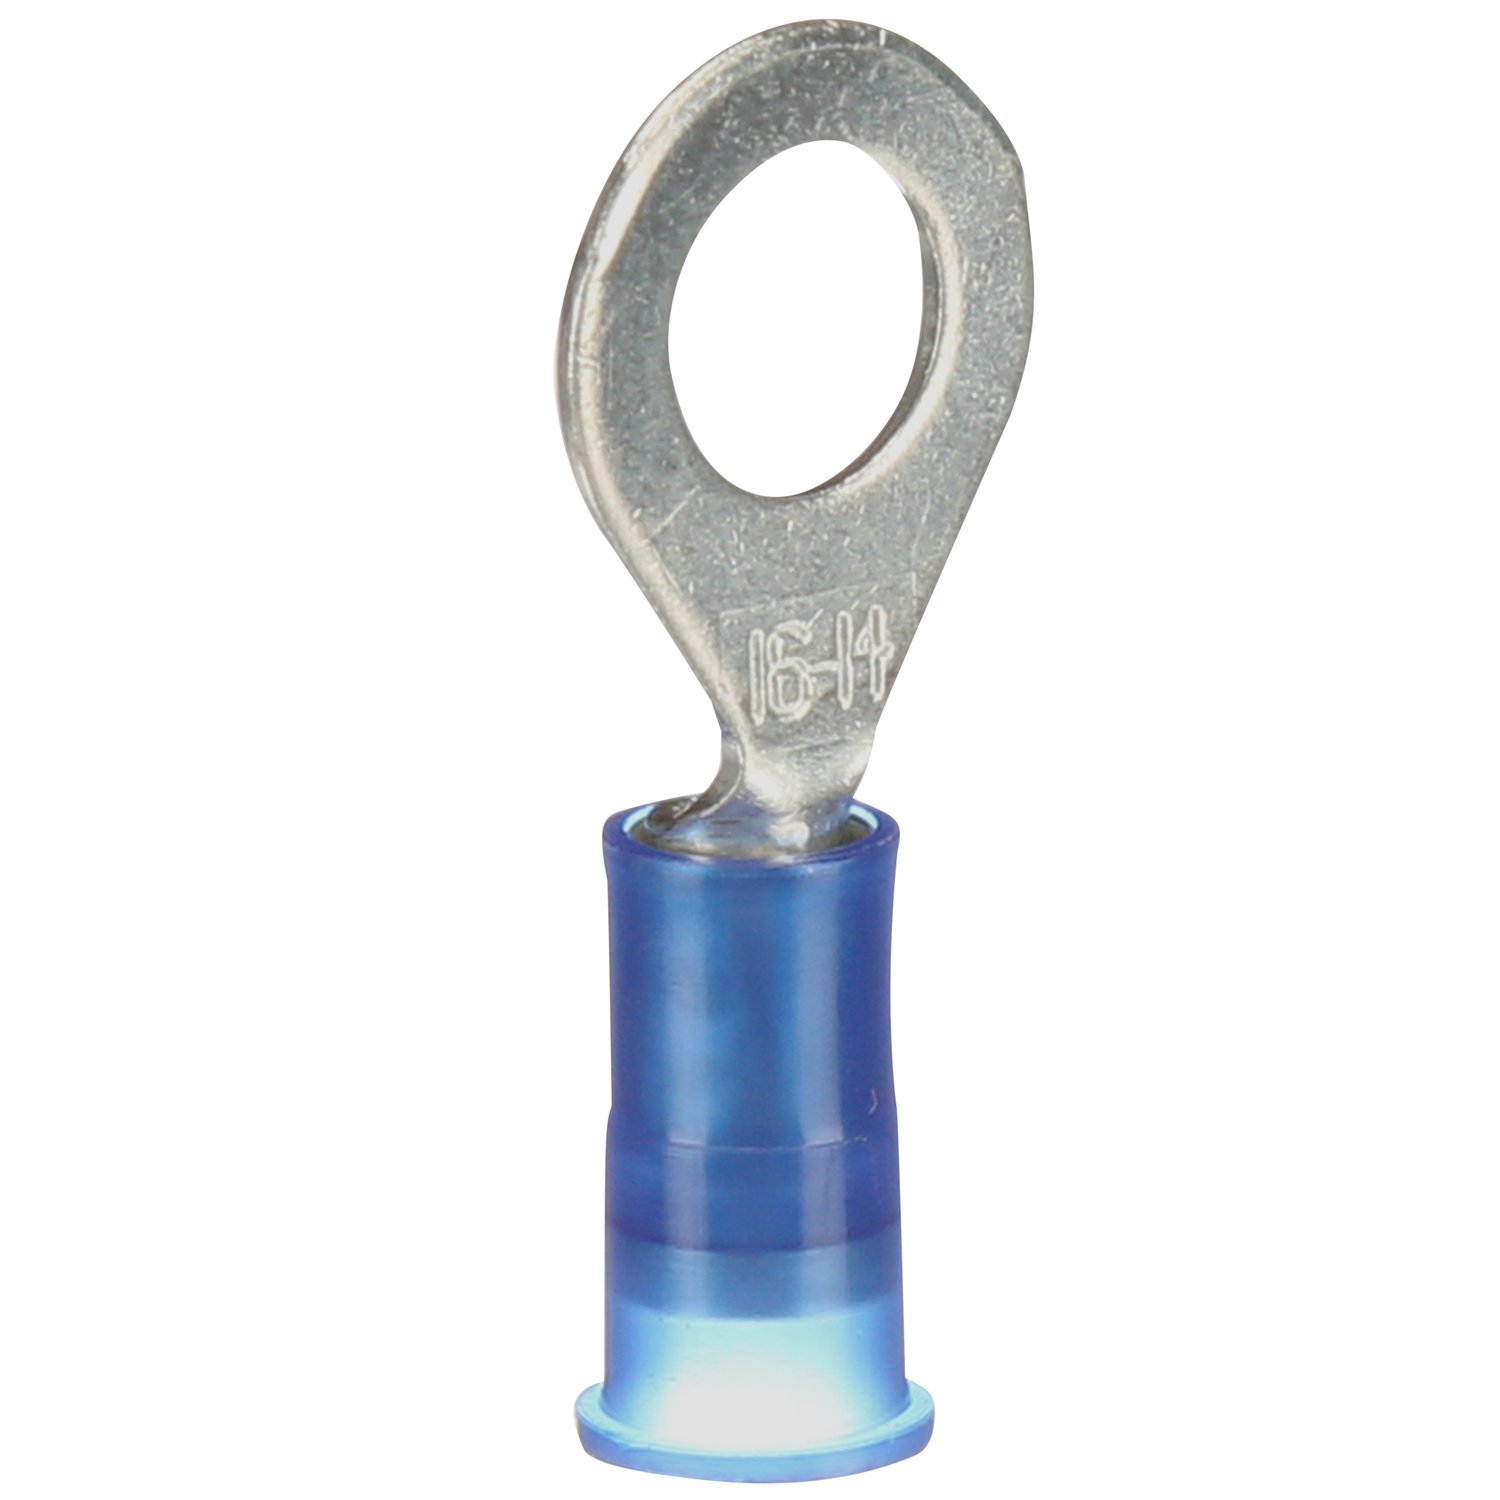 7000133417 - 3M Scotchlok Ring Nylon Insulated, 100/bottle, MNG14-516R/SX,
standard-style ring tongue fits around the stud, 500/Case